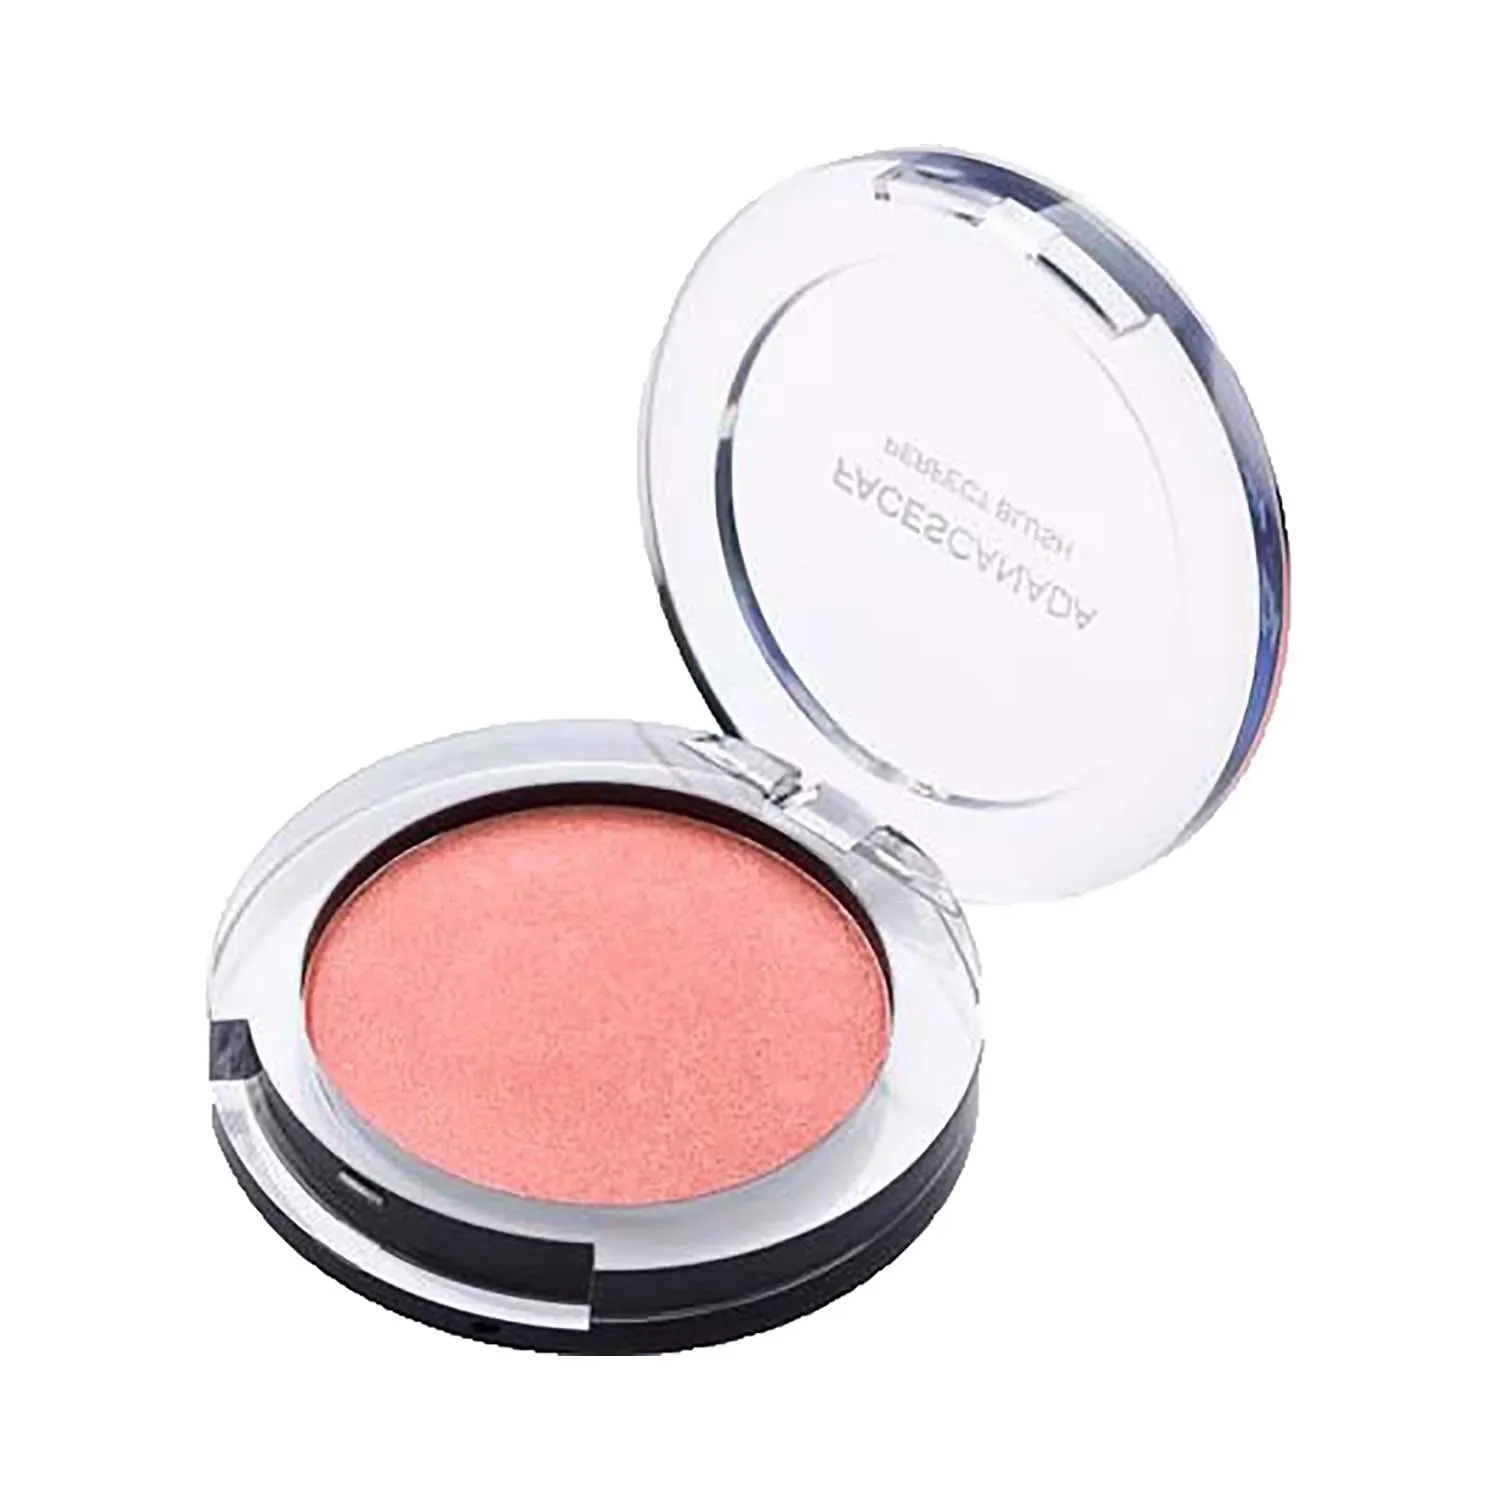 Faces Canada | Faces Canada Perfecting Blush - 01 Coral Pink (5g)